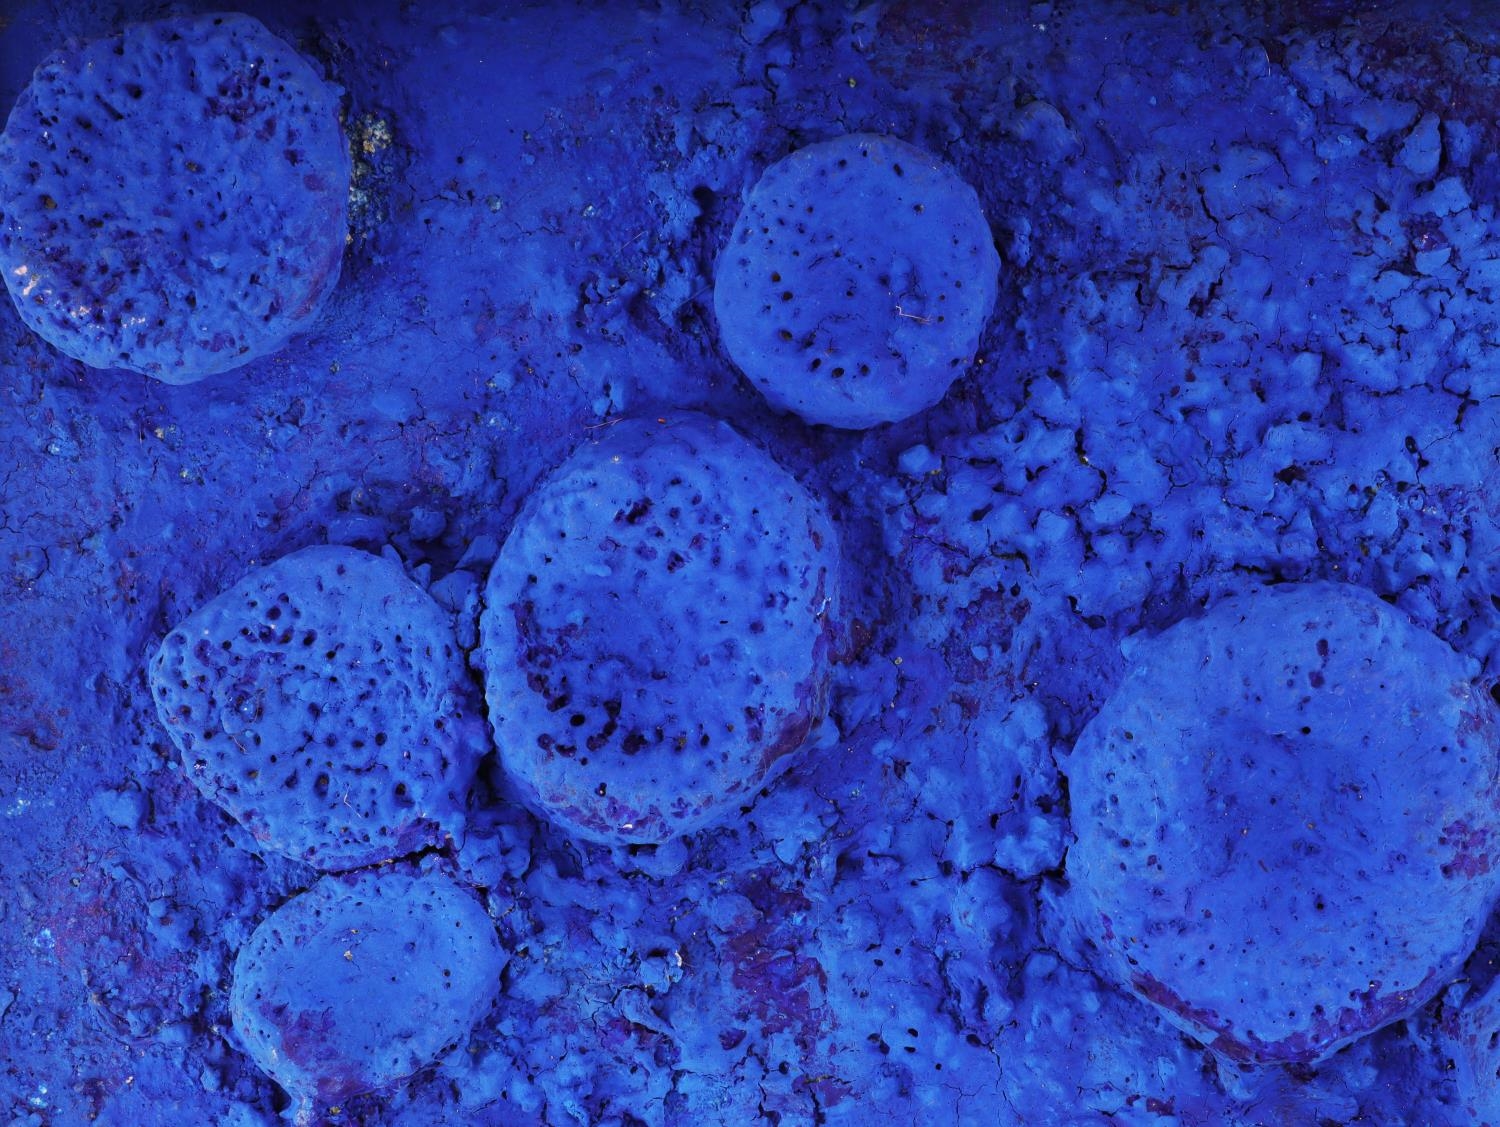 Artwork by Yves Klein, YVES KLEIN BLUE TEXTURAL MODERN ART PAINTING, Made of PAINTING